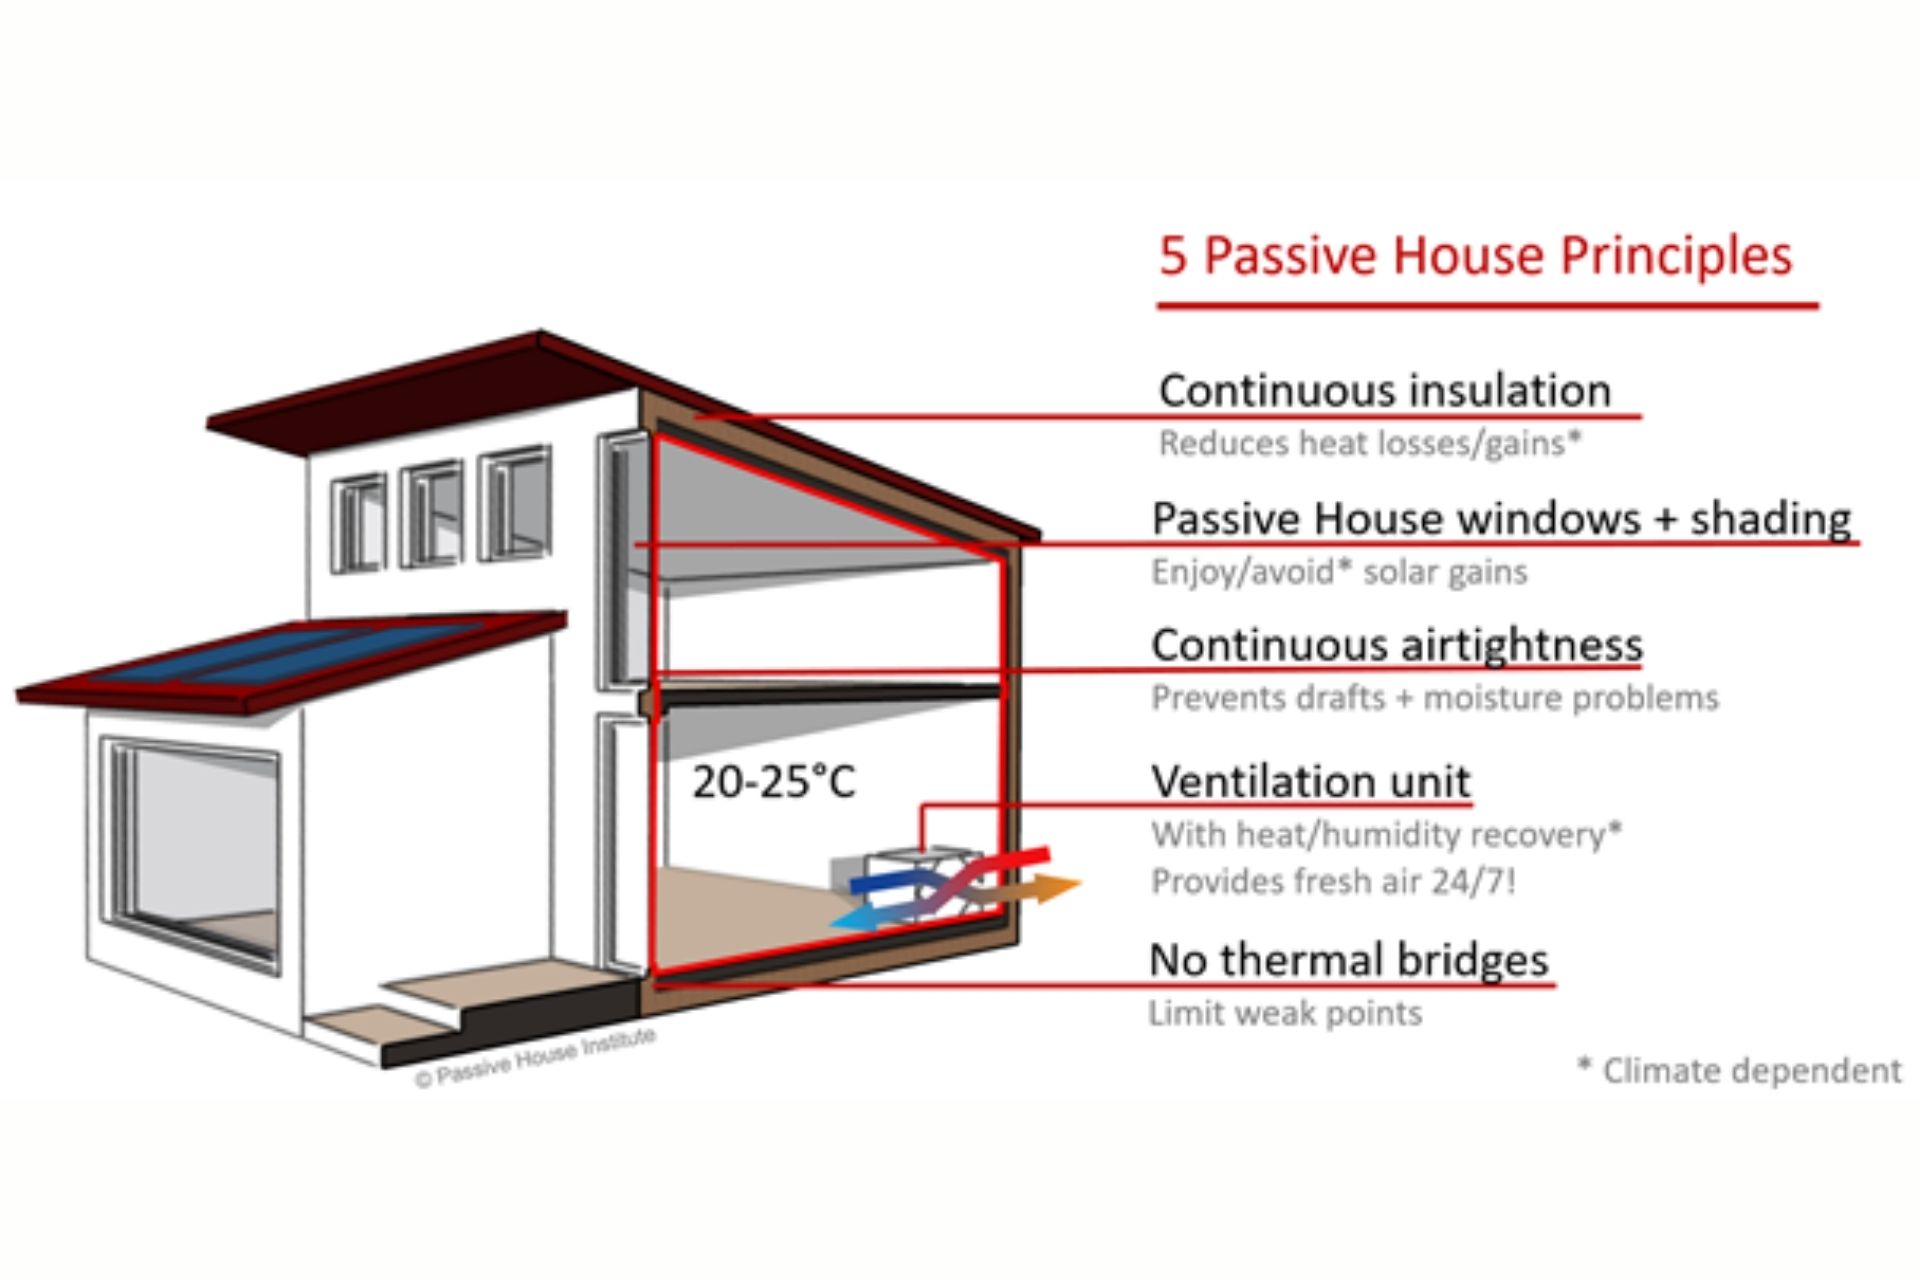 HVAC considerations for extreme climates